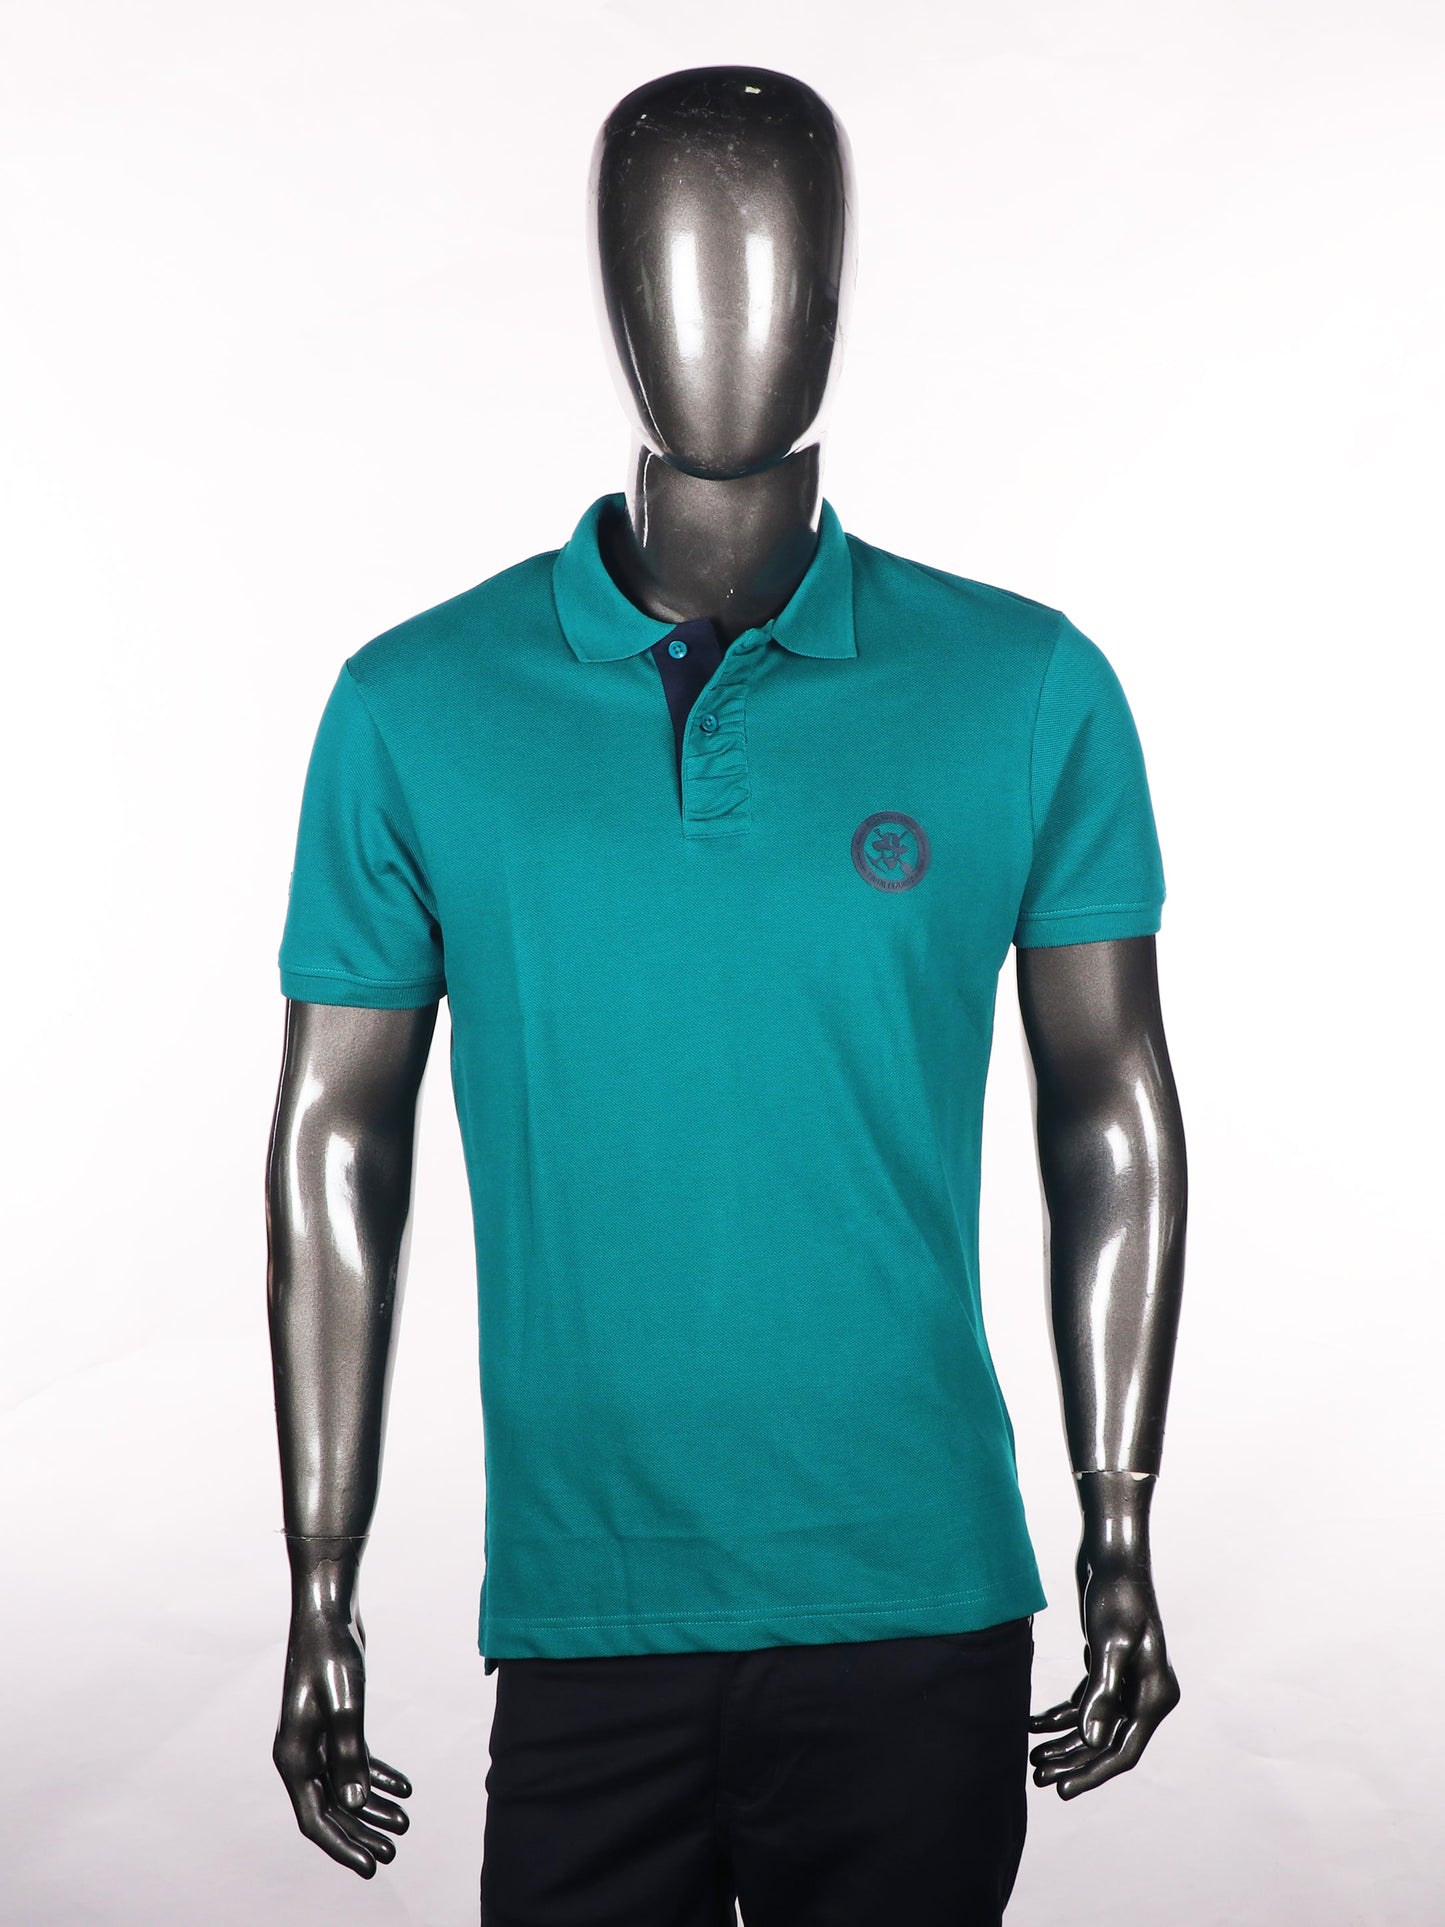 Slim Fit Teal Blue Polo T-Shirt in pique fabric